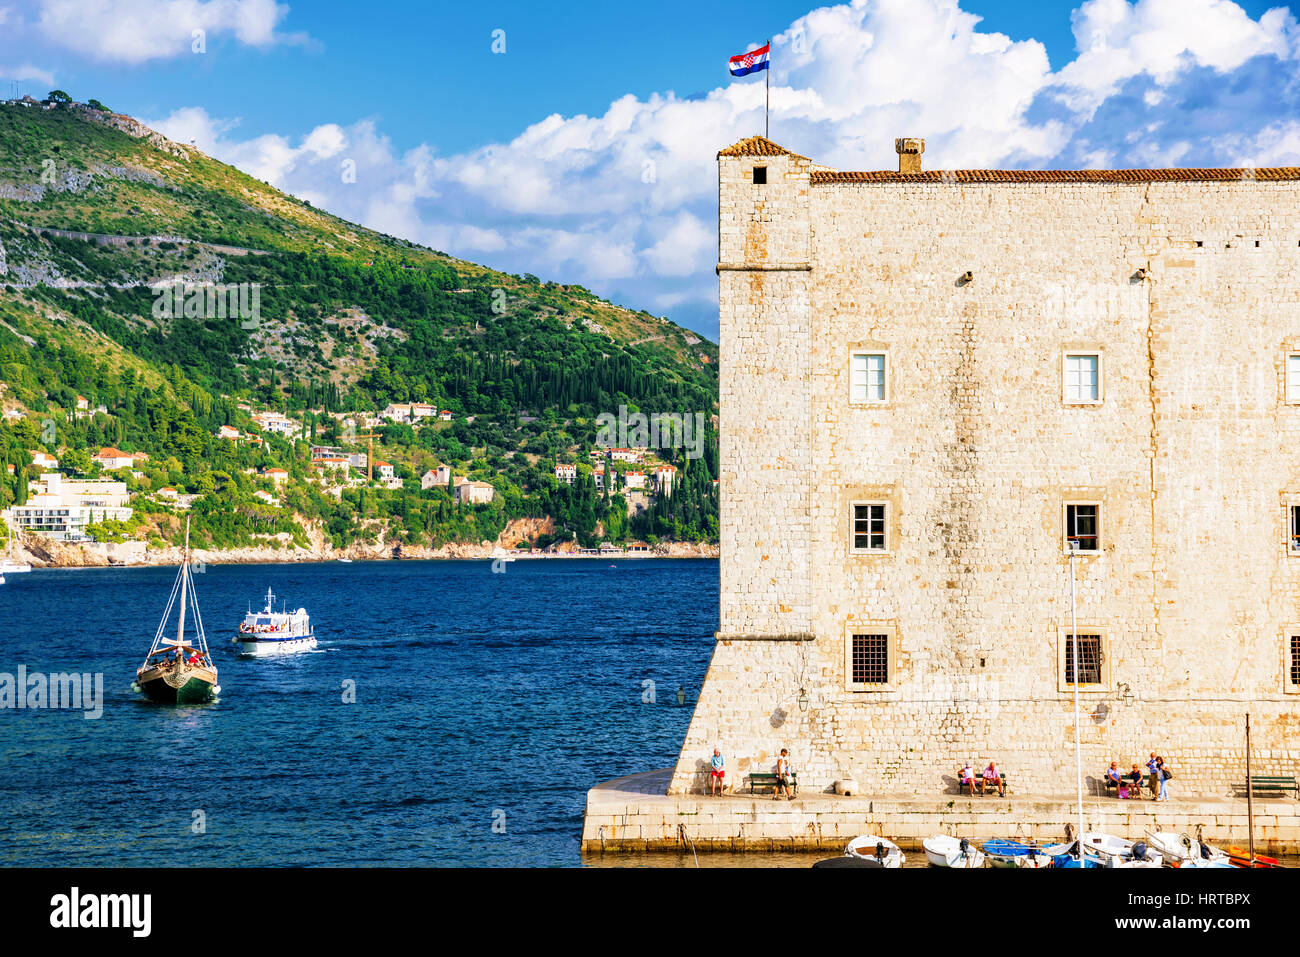 DUBROVNIK, CROATIA - SEPTEMBER 22: Castle wall and harbor area of Dubrovnik's seafront with boats and nature on September 22, 2016 in Dubrovnik Stock Photo